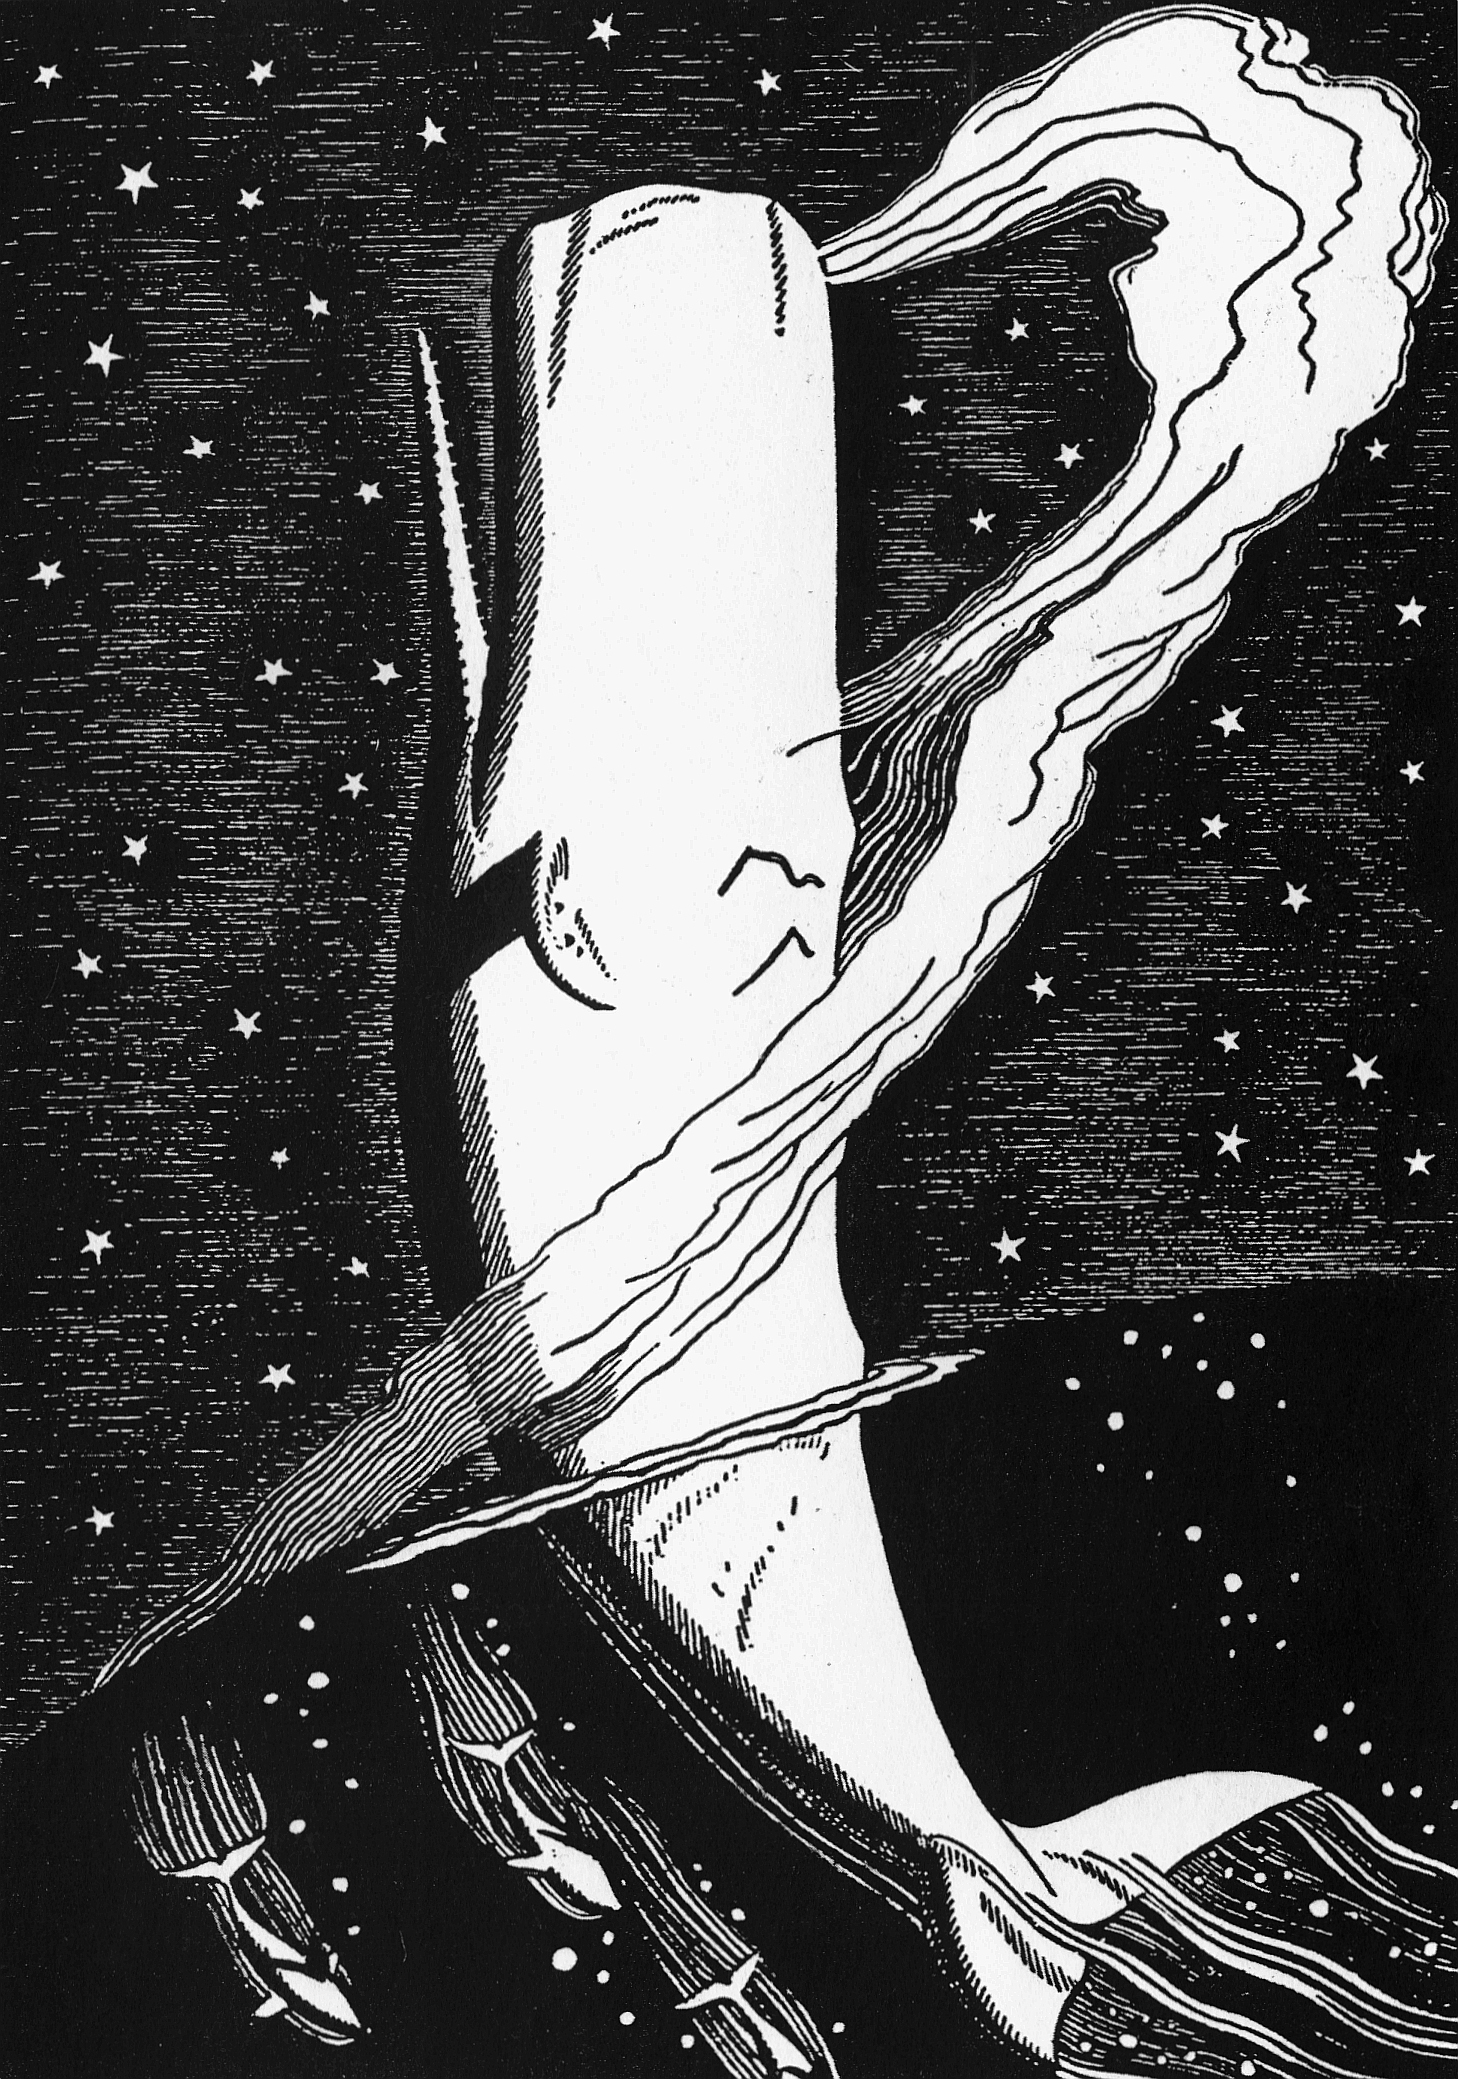 Rockwell Kent, Illustration from Moby-Dick. Black ink on paper, ca. 1929.